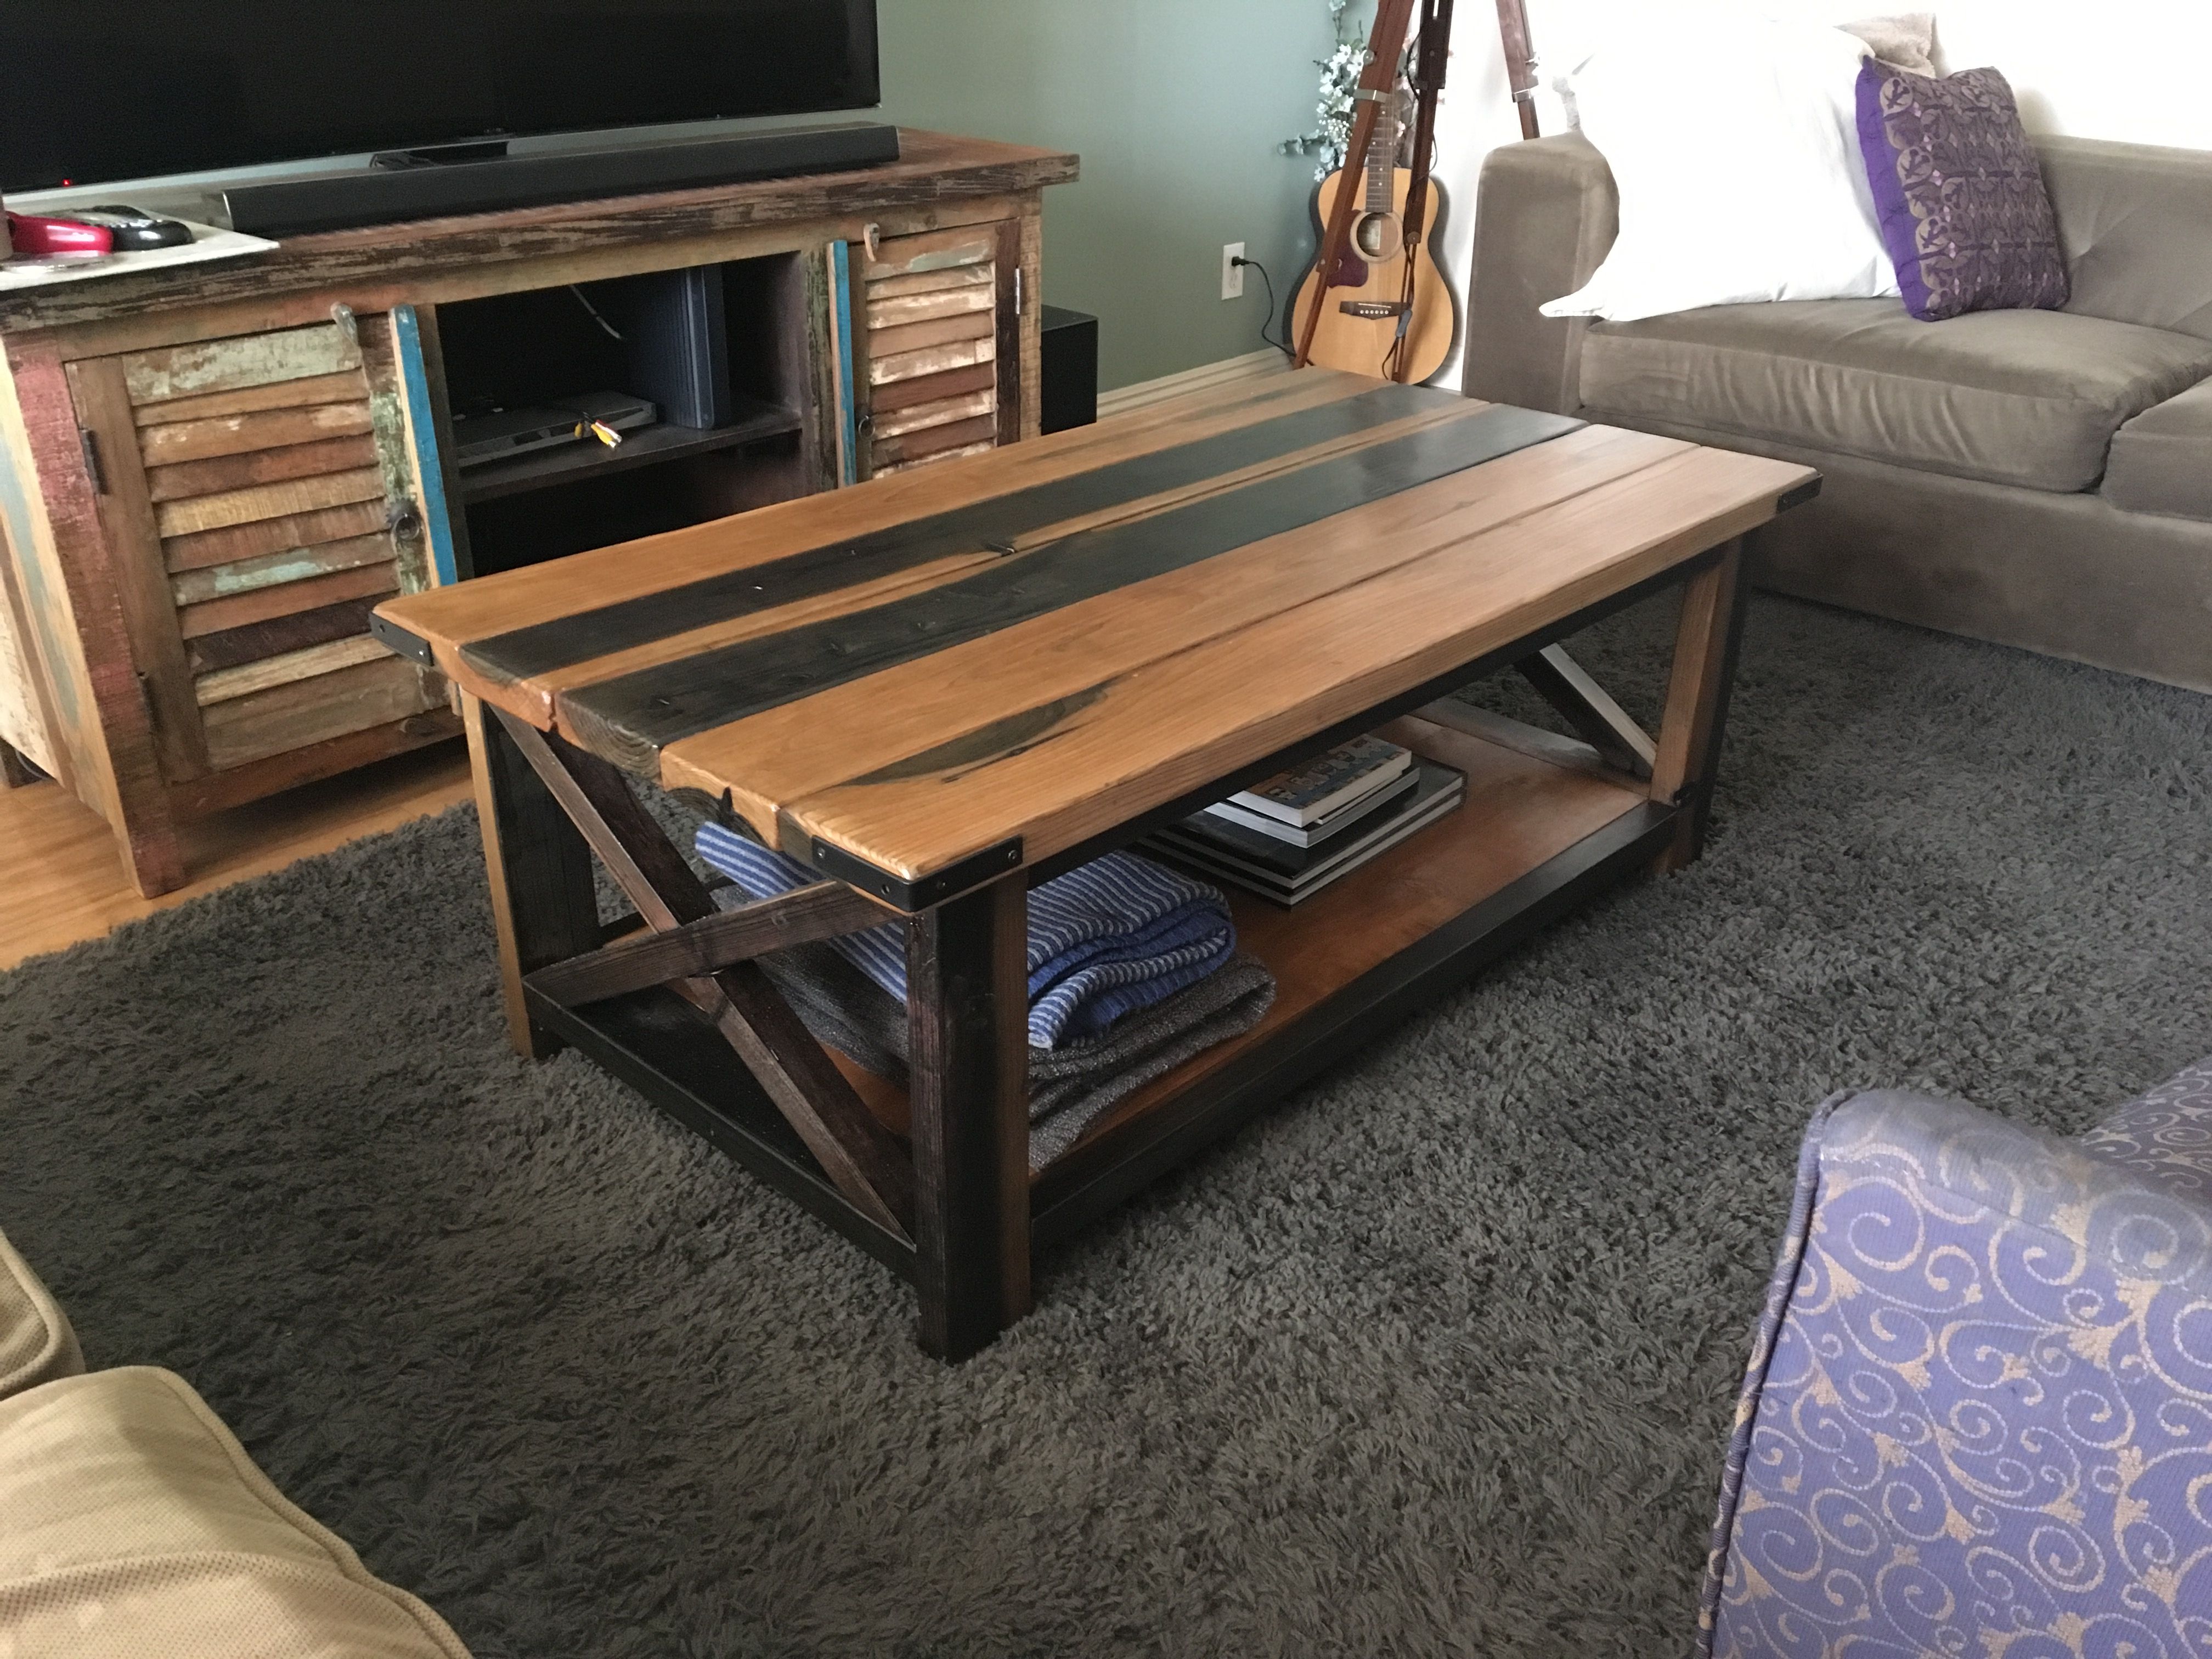 Preferred Furniture: Appealing Rustic Coffee Tables In Unique Wood Rectangle For Rustic Coffee Table And Tv Stand (View 15 of 20)